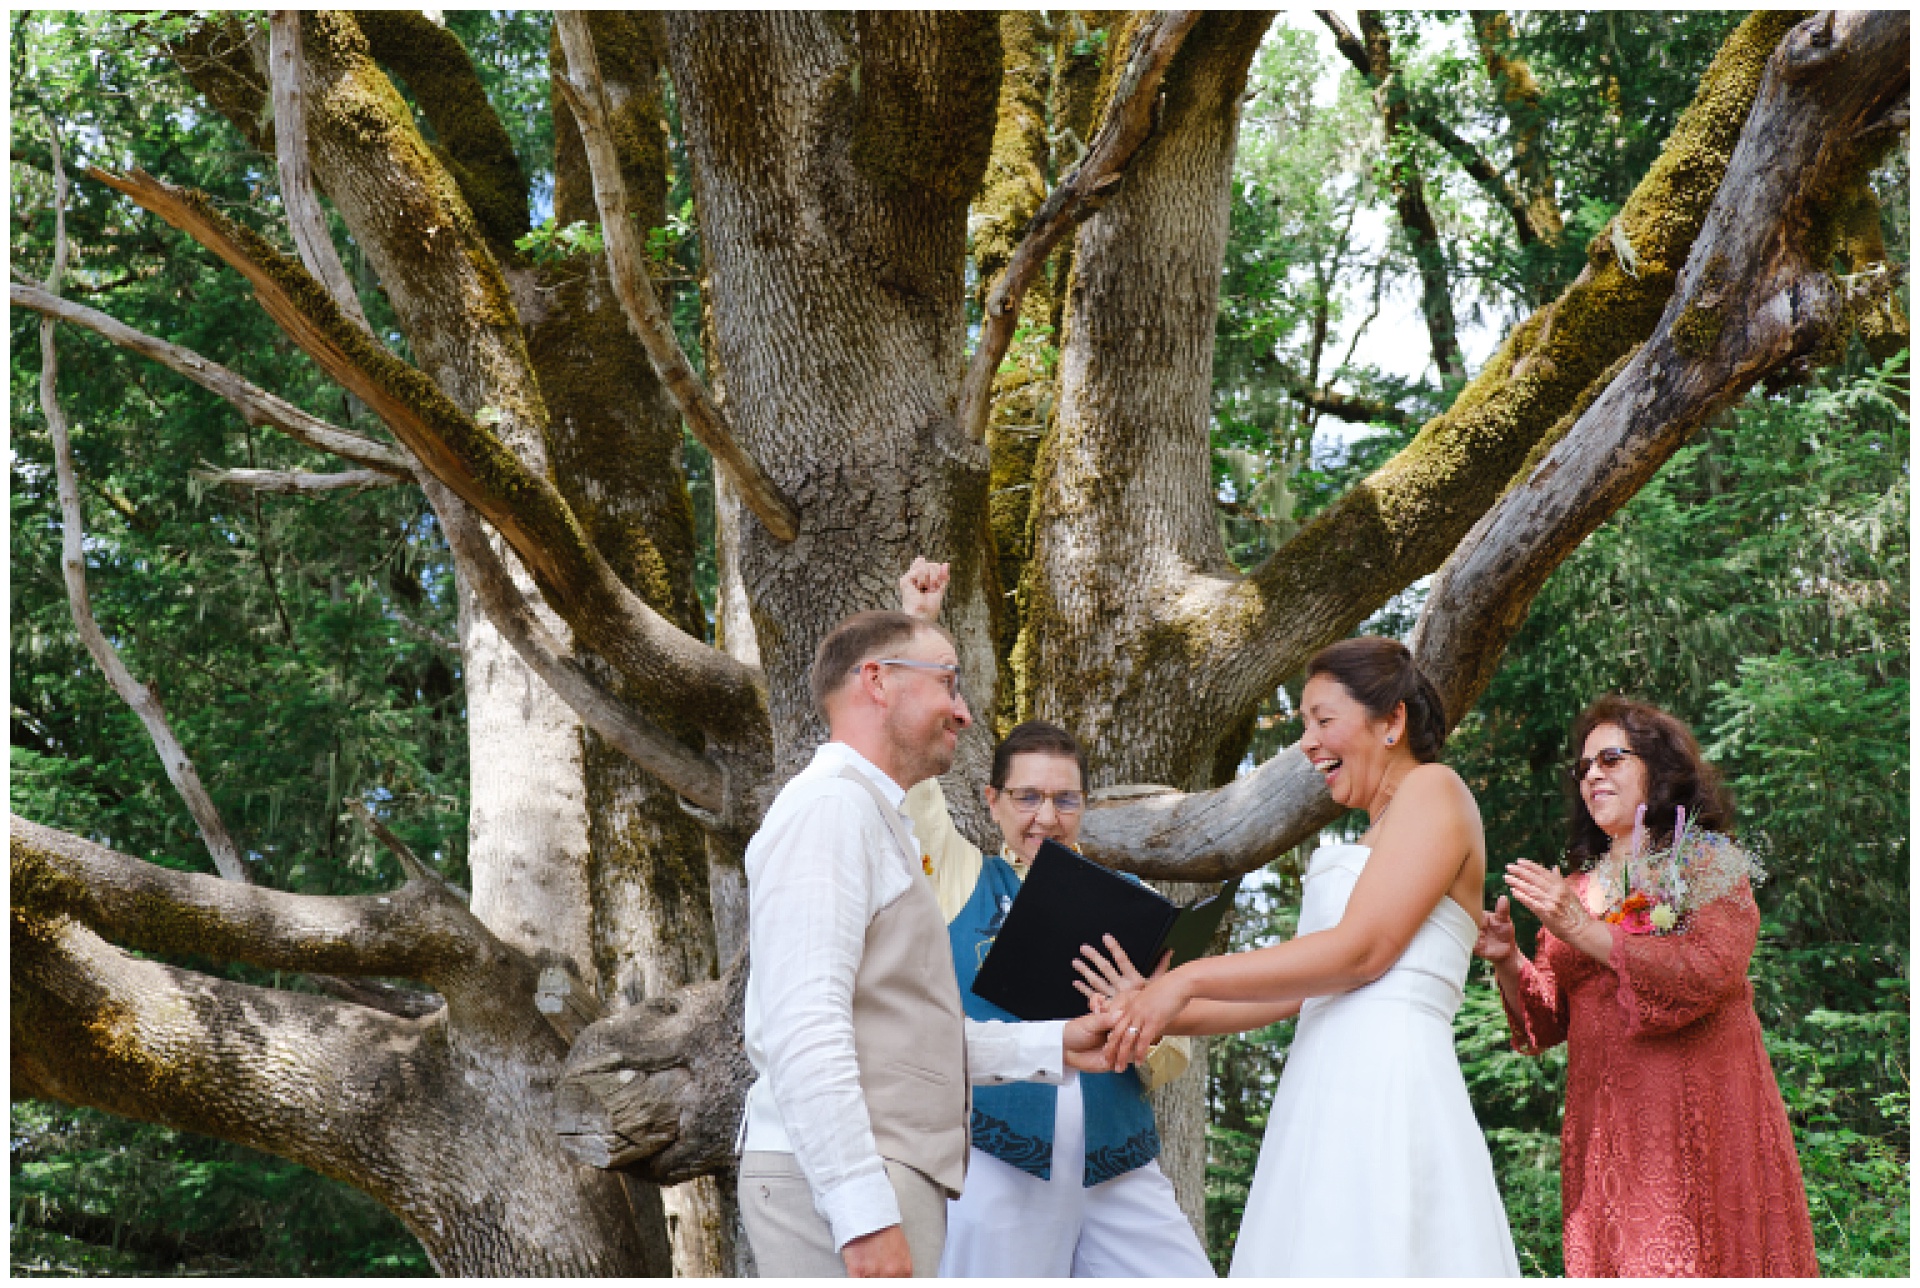 Bride and groom getting married under an ancient oak tree at Fitton Green, Corvallis